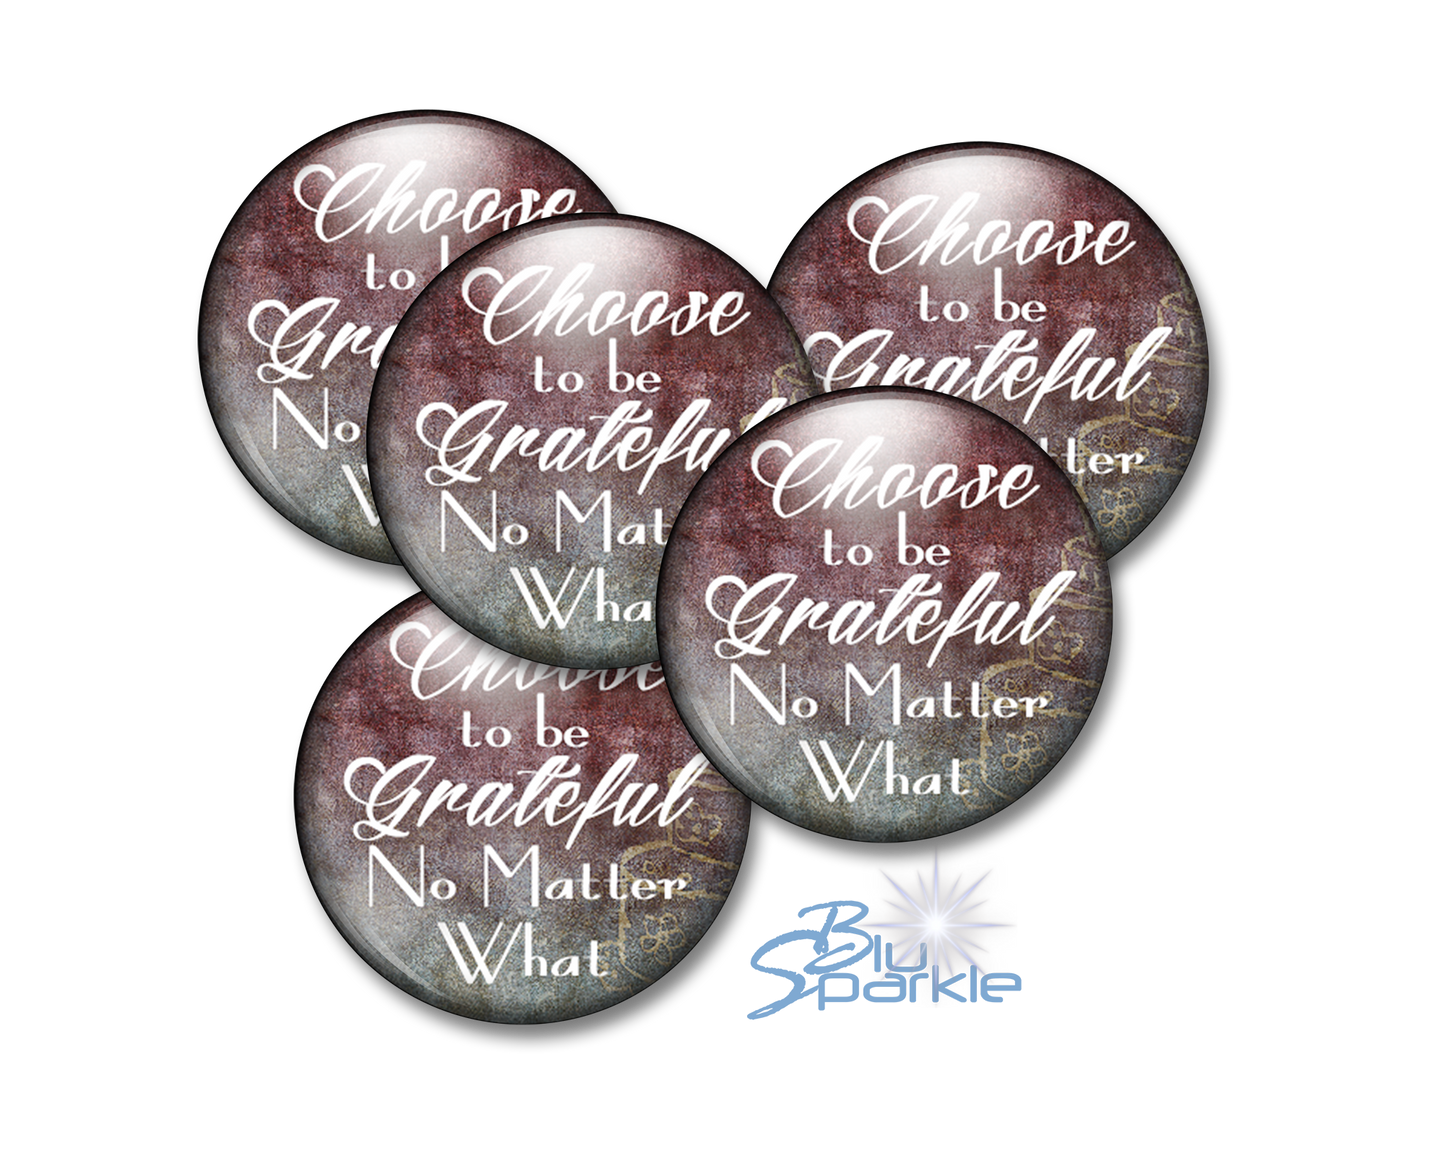 Choose To Be Grateful No Matter What - Pinback Buttons